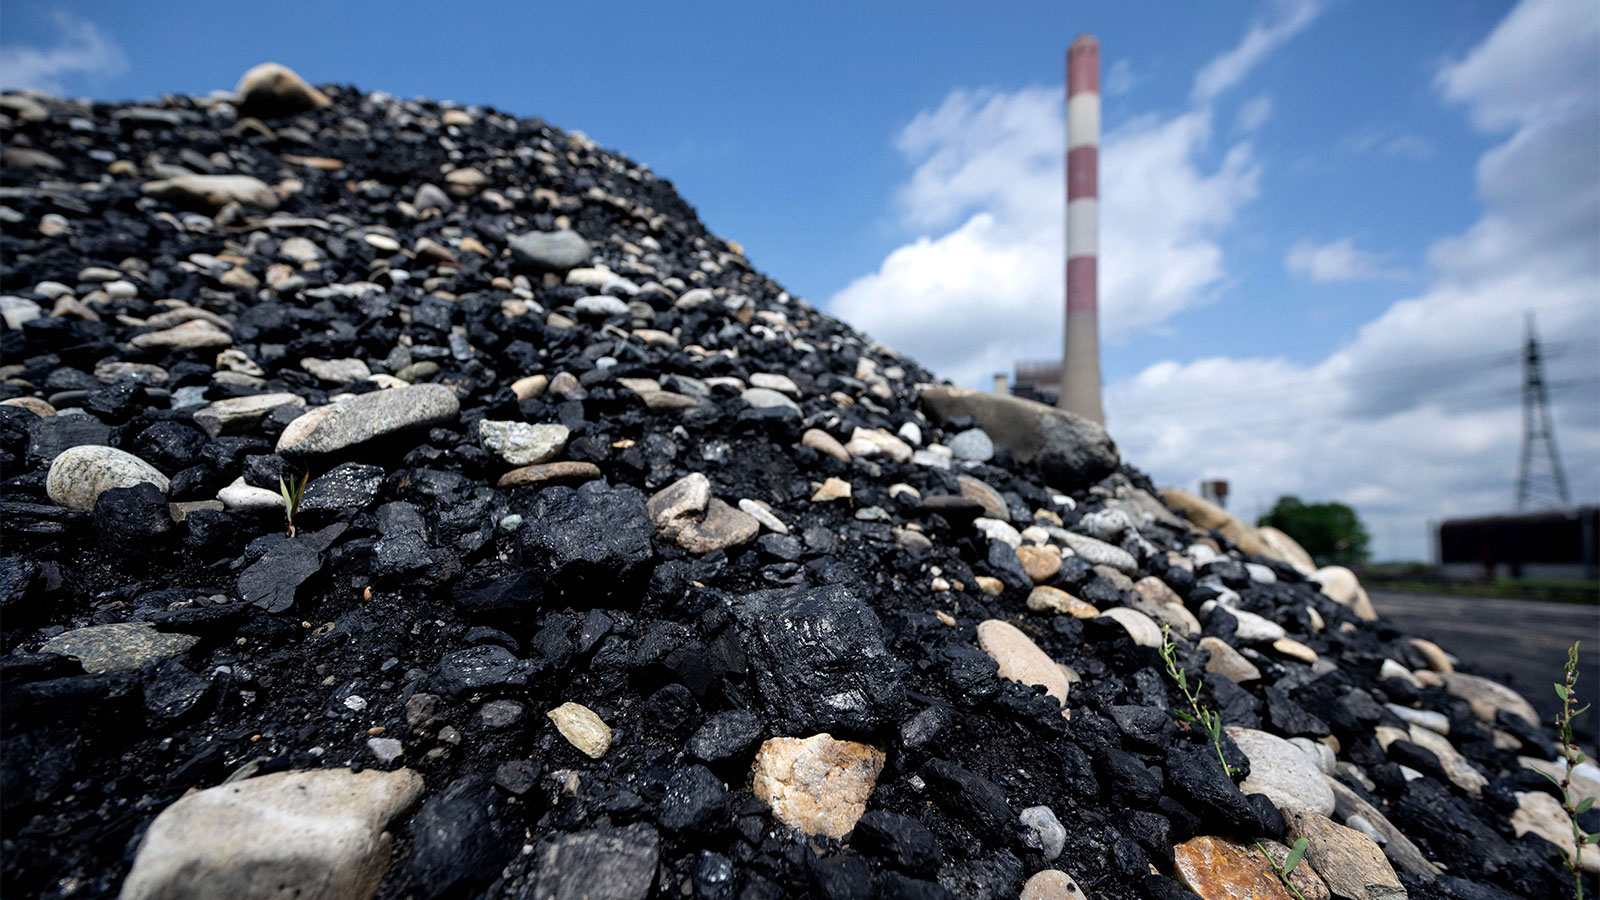 A large pile of coal and rocks with a coal power plant smokestack in the distance